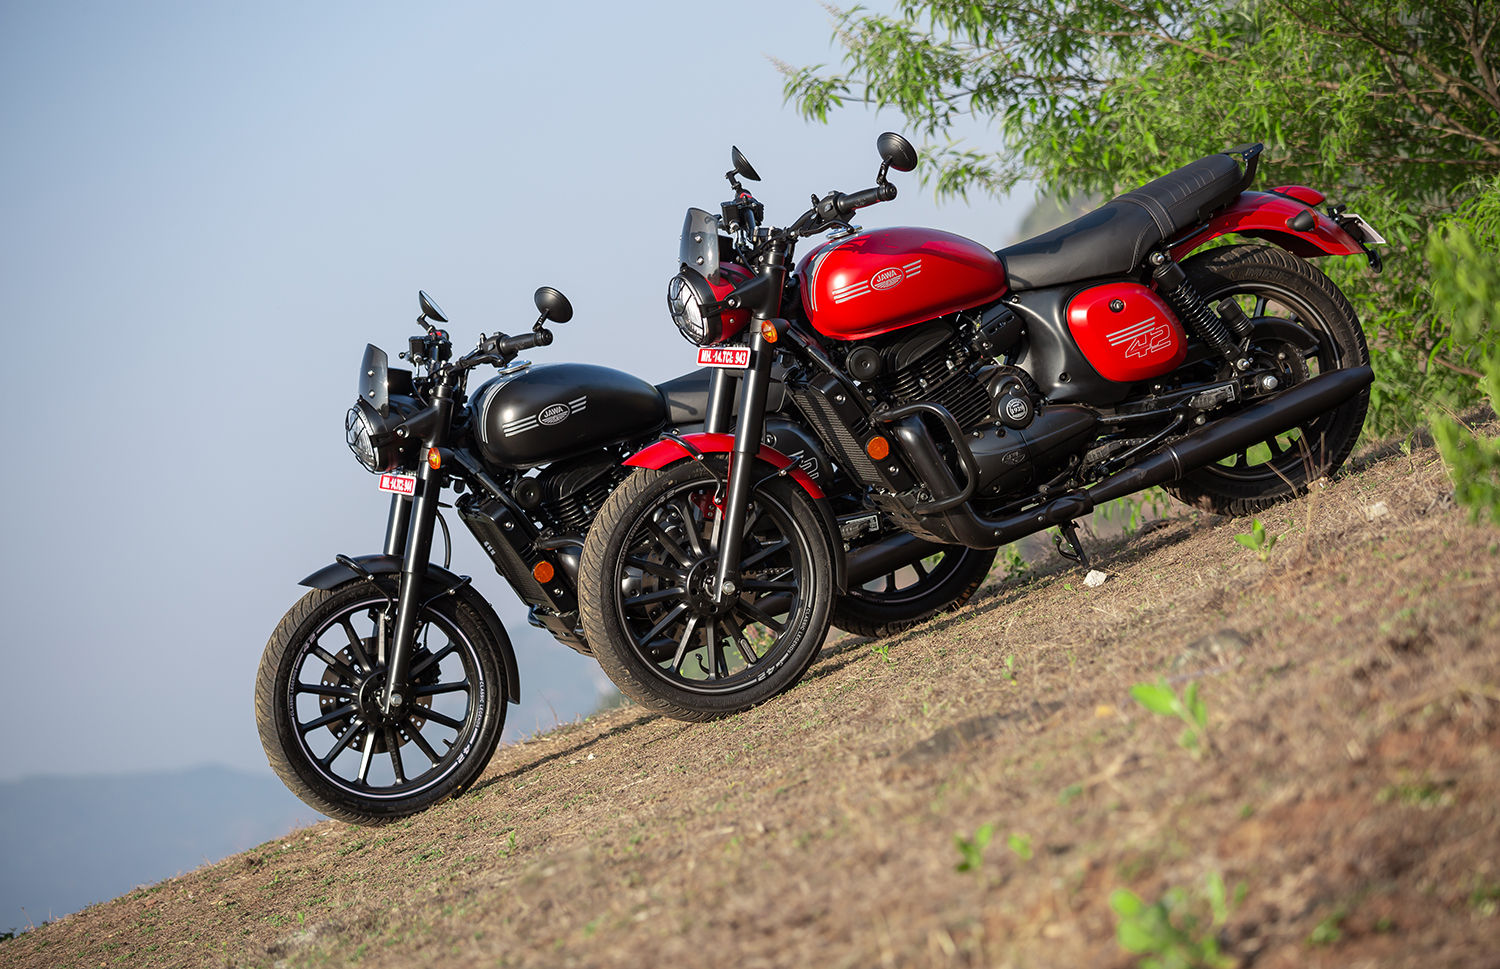  Jawa  42  2 1 Road Test Review In Images BikeDekho